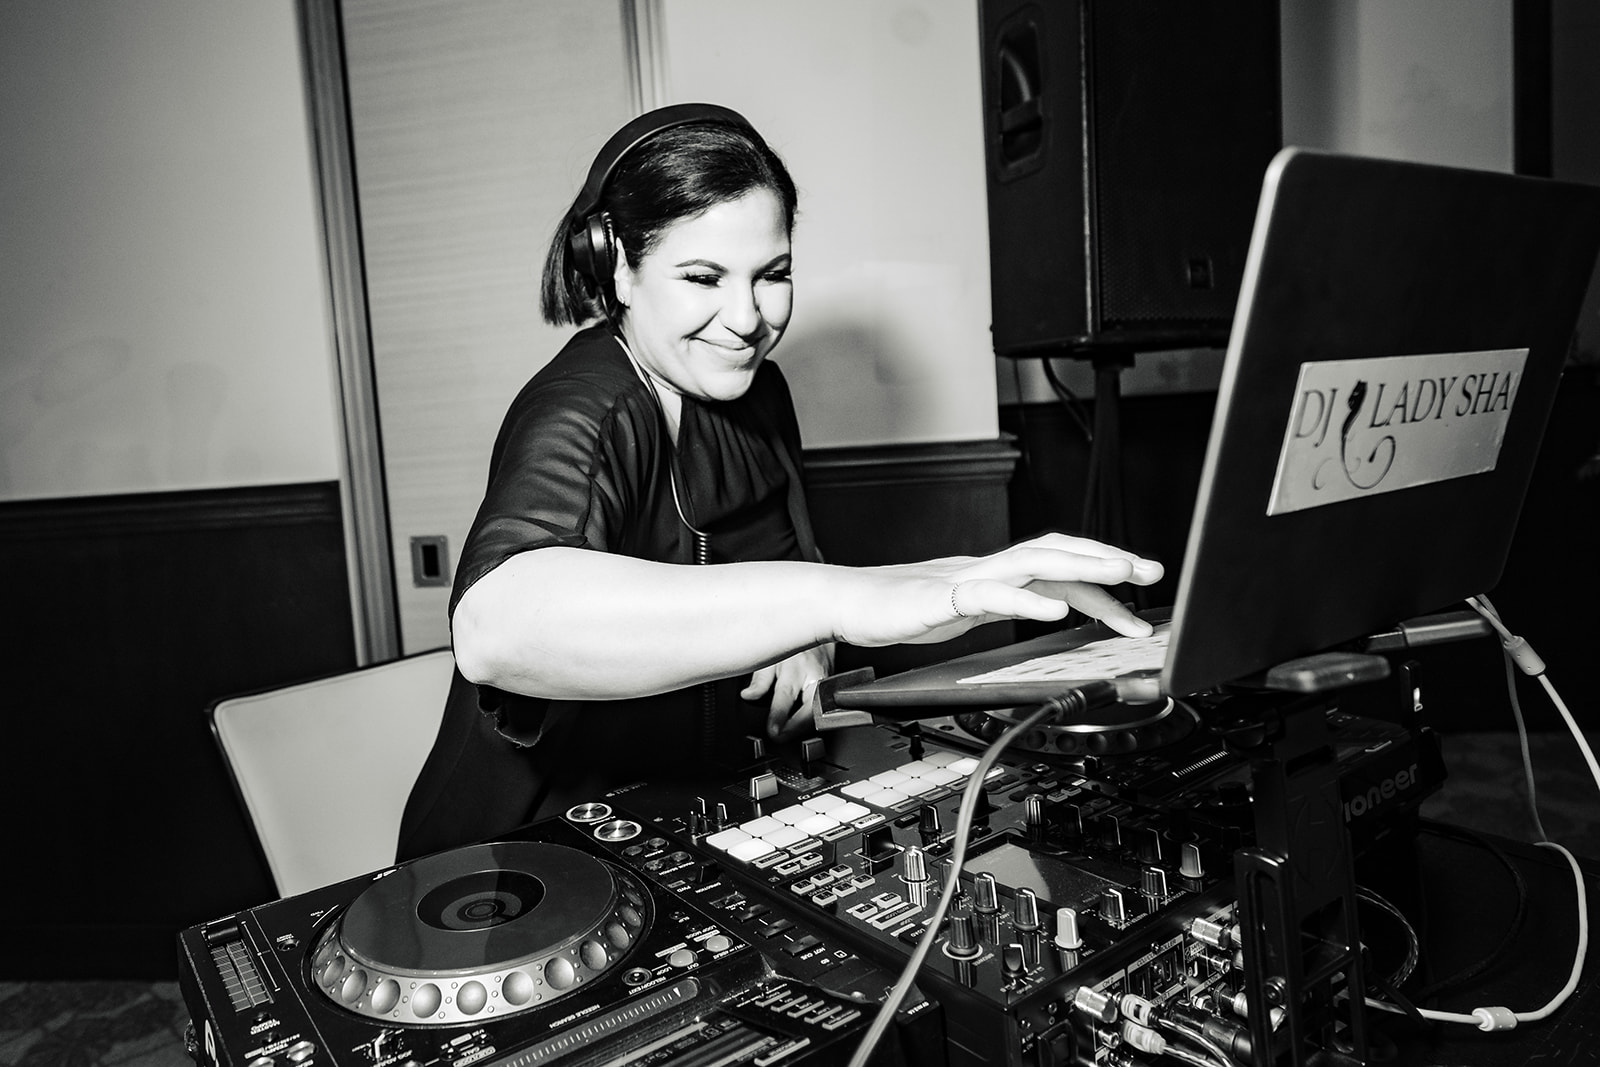 DJ Lady Sha smiles as she plays music for guests during a wedding reception in Irvine, CA